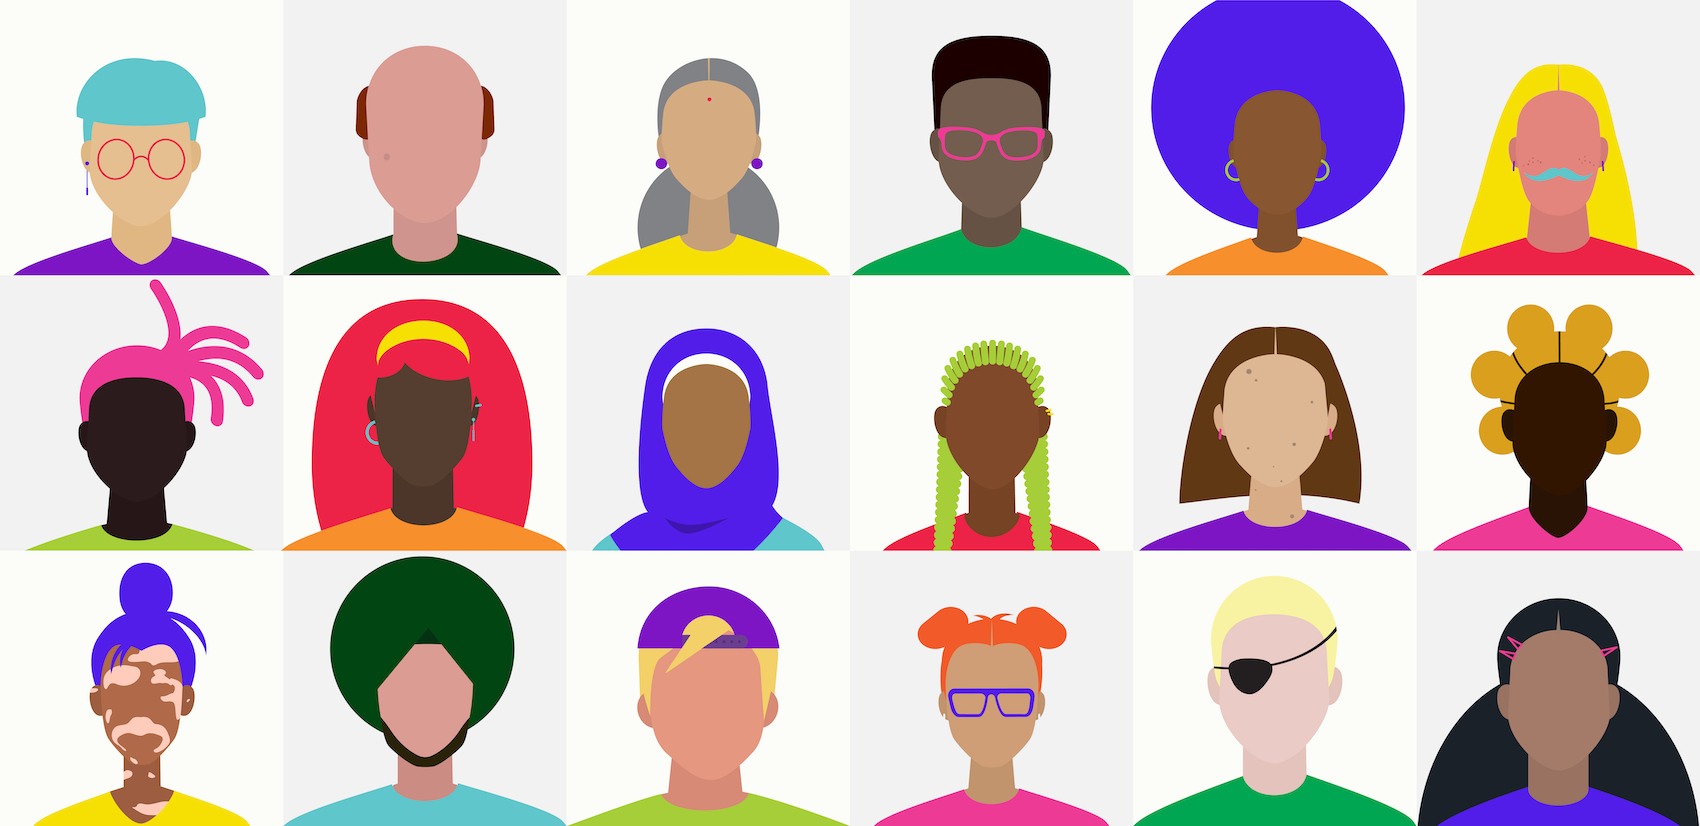 a wide range of colorful illustrated faces in a grid